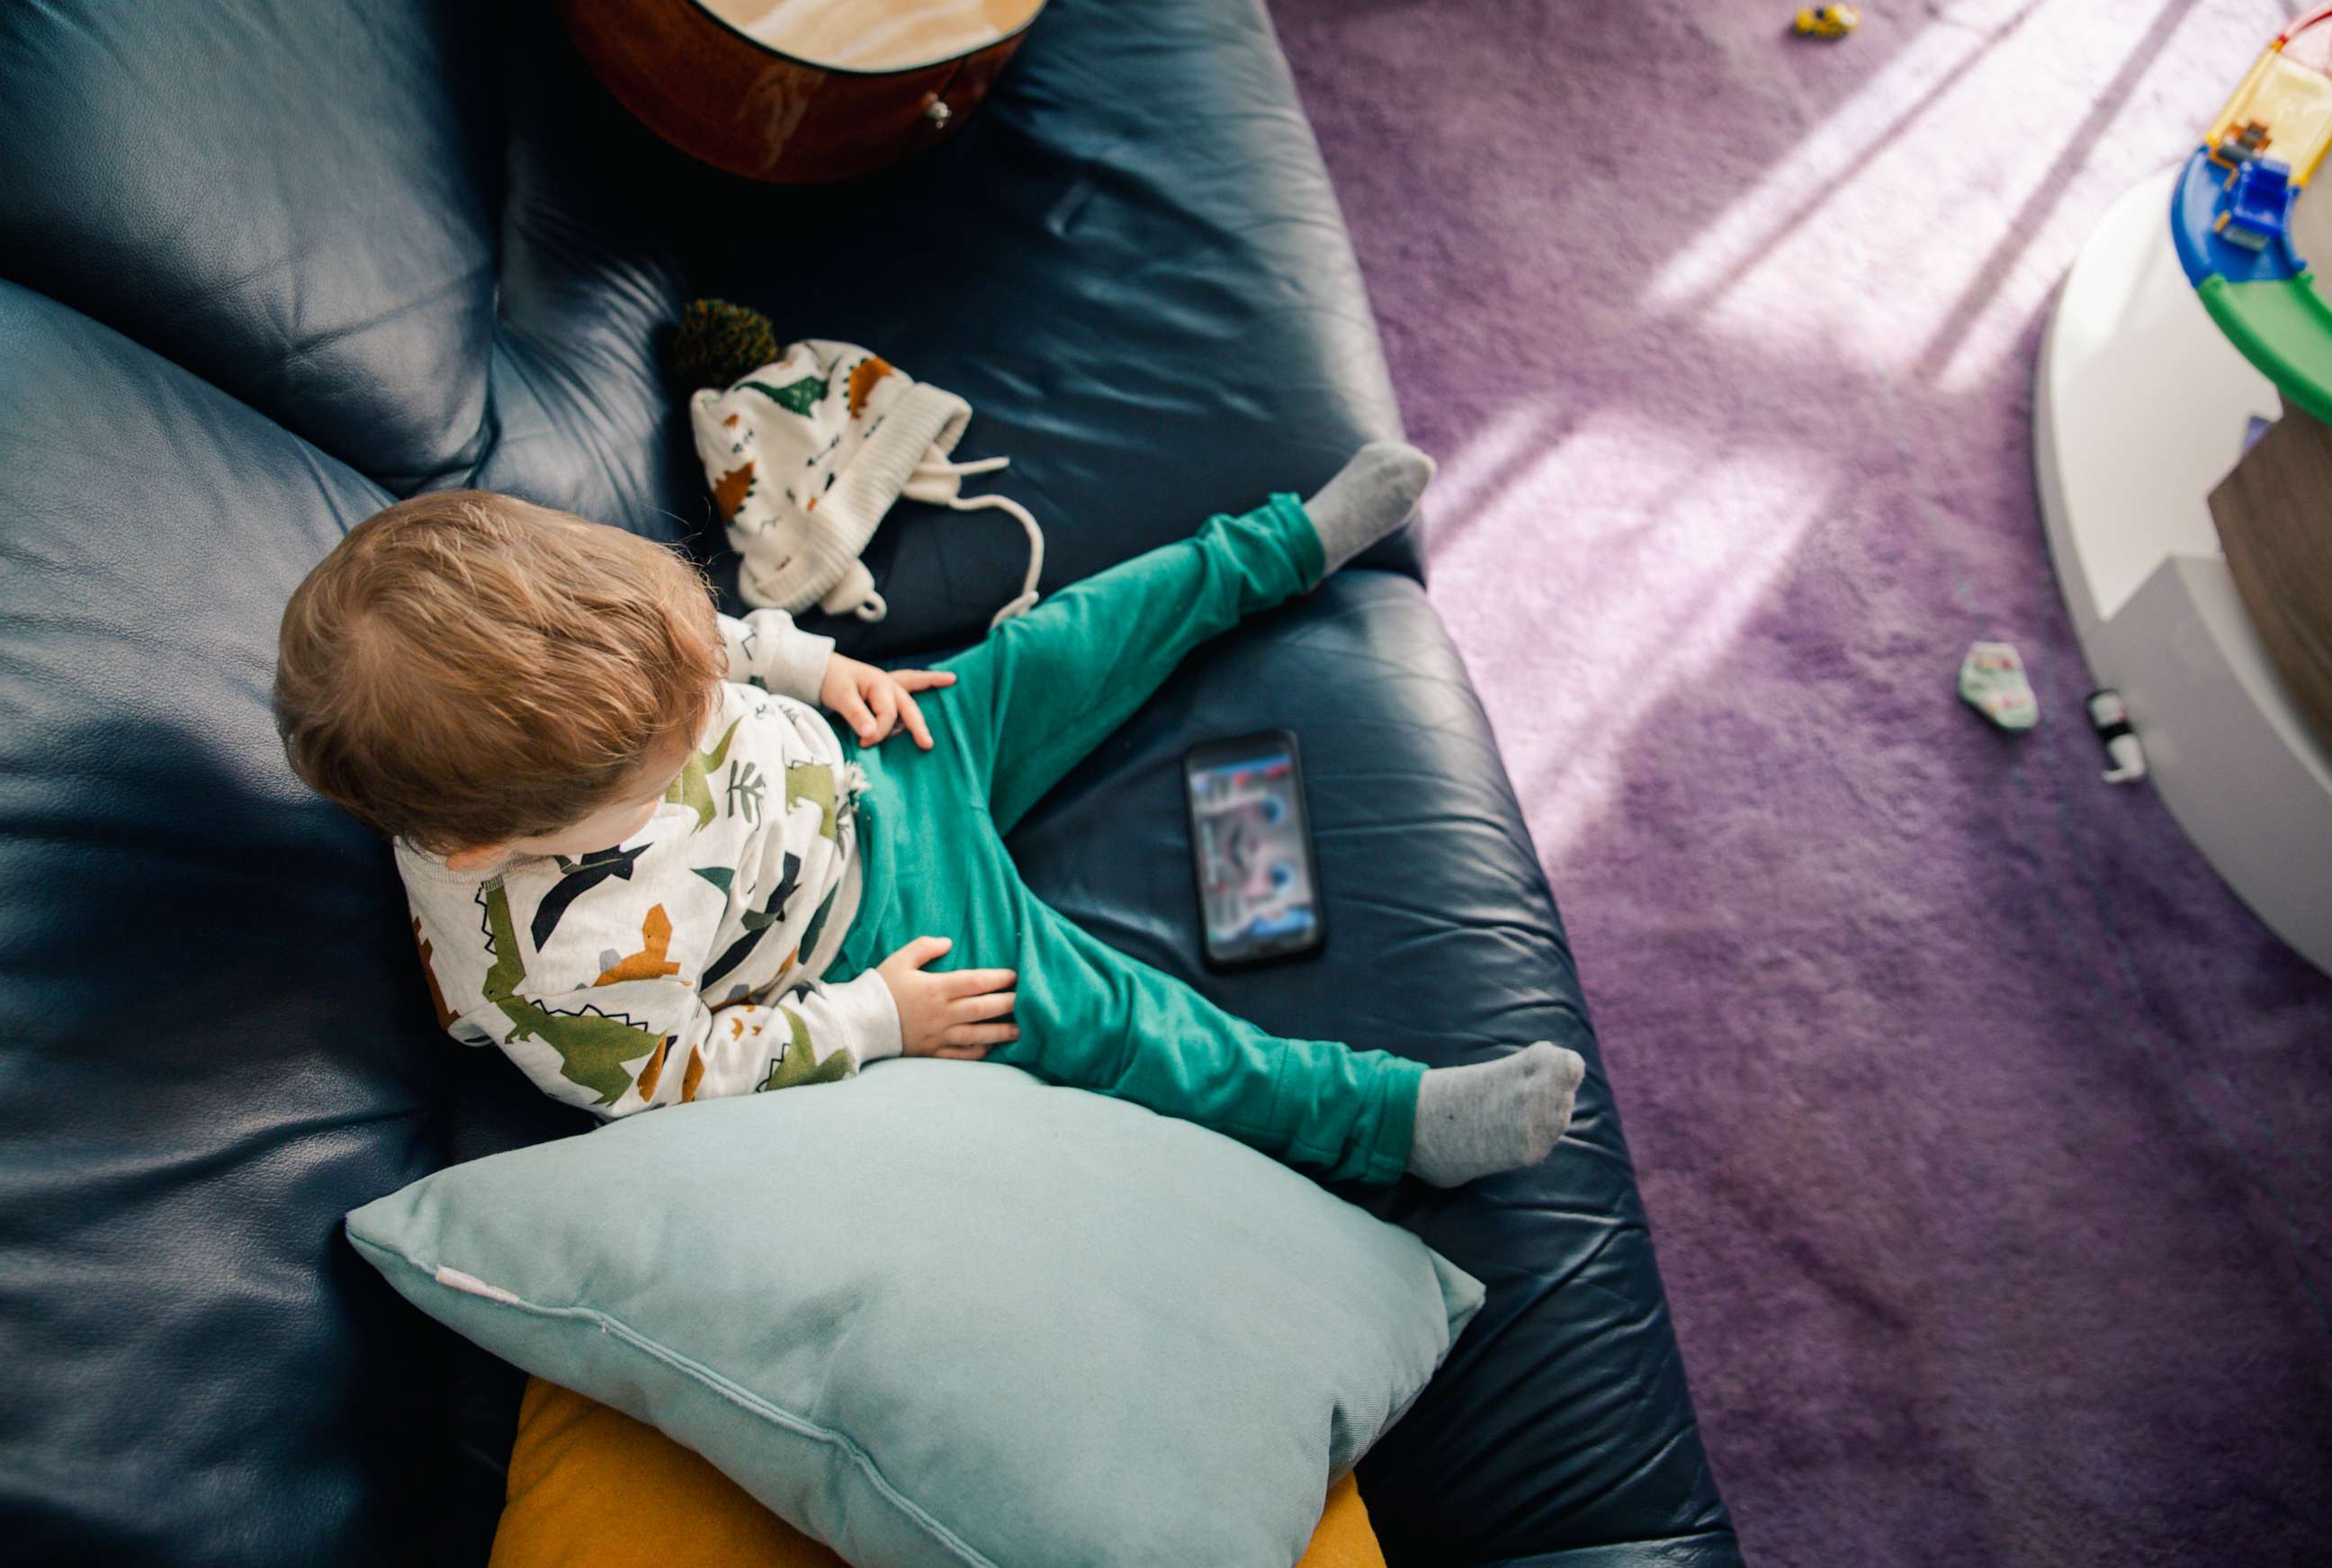 PHOTO: In this stock photo, a toddler watches cartoons on the phone.